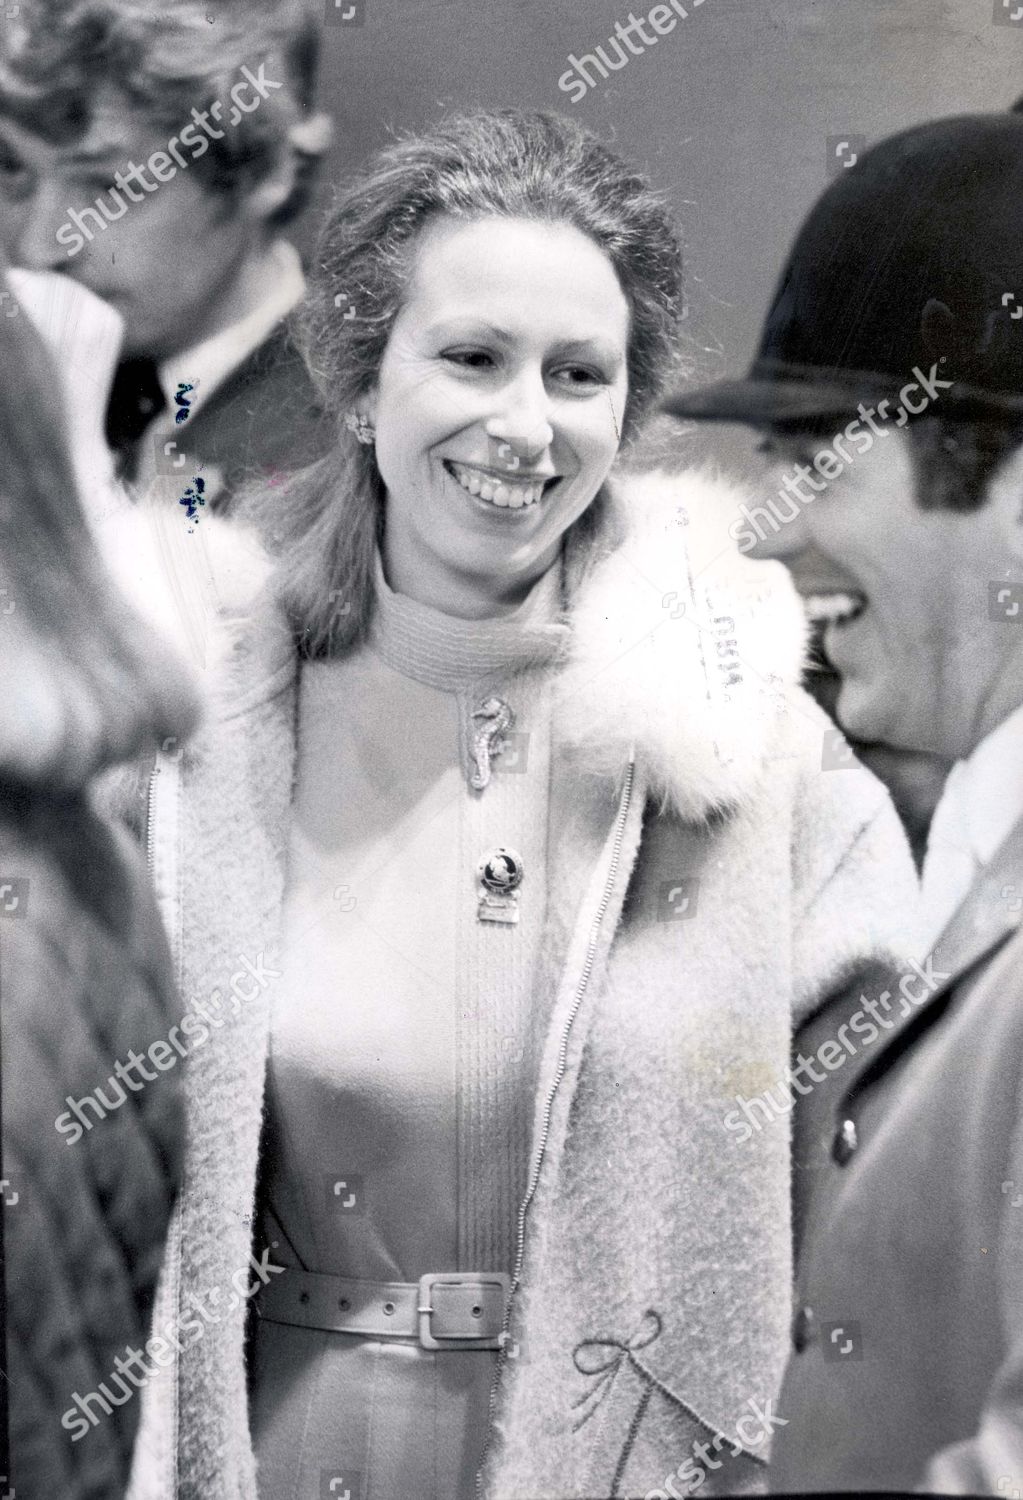 princess-anne-now-princess-royal-1979-picture-shows-princess-anne-at-the-international-show-jumping-championships-at-olympia-celebrity-team-jumping-event-with-mark-phillips-angela-rippon-among-the-celebrities-against-prince-charles-and-polo-pl-shutterstock-editorial-890983a.jpg